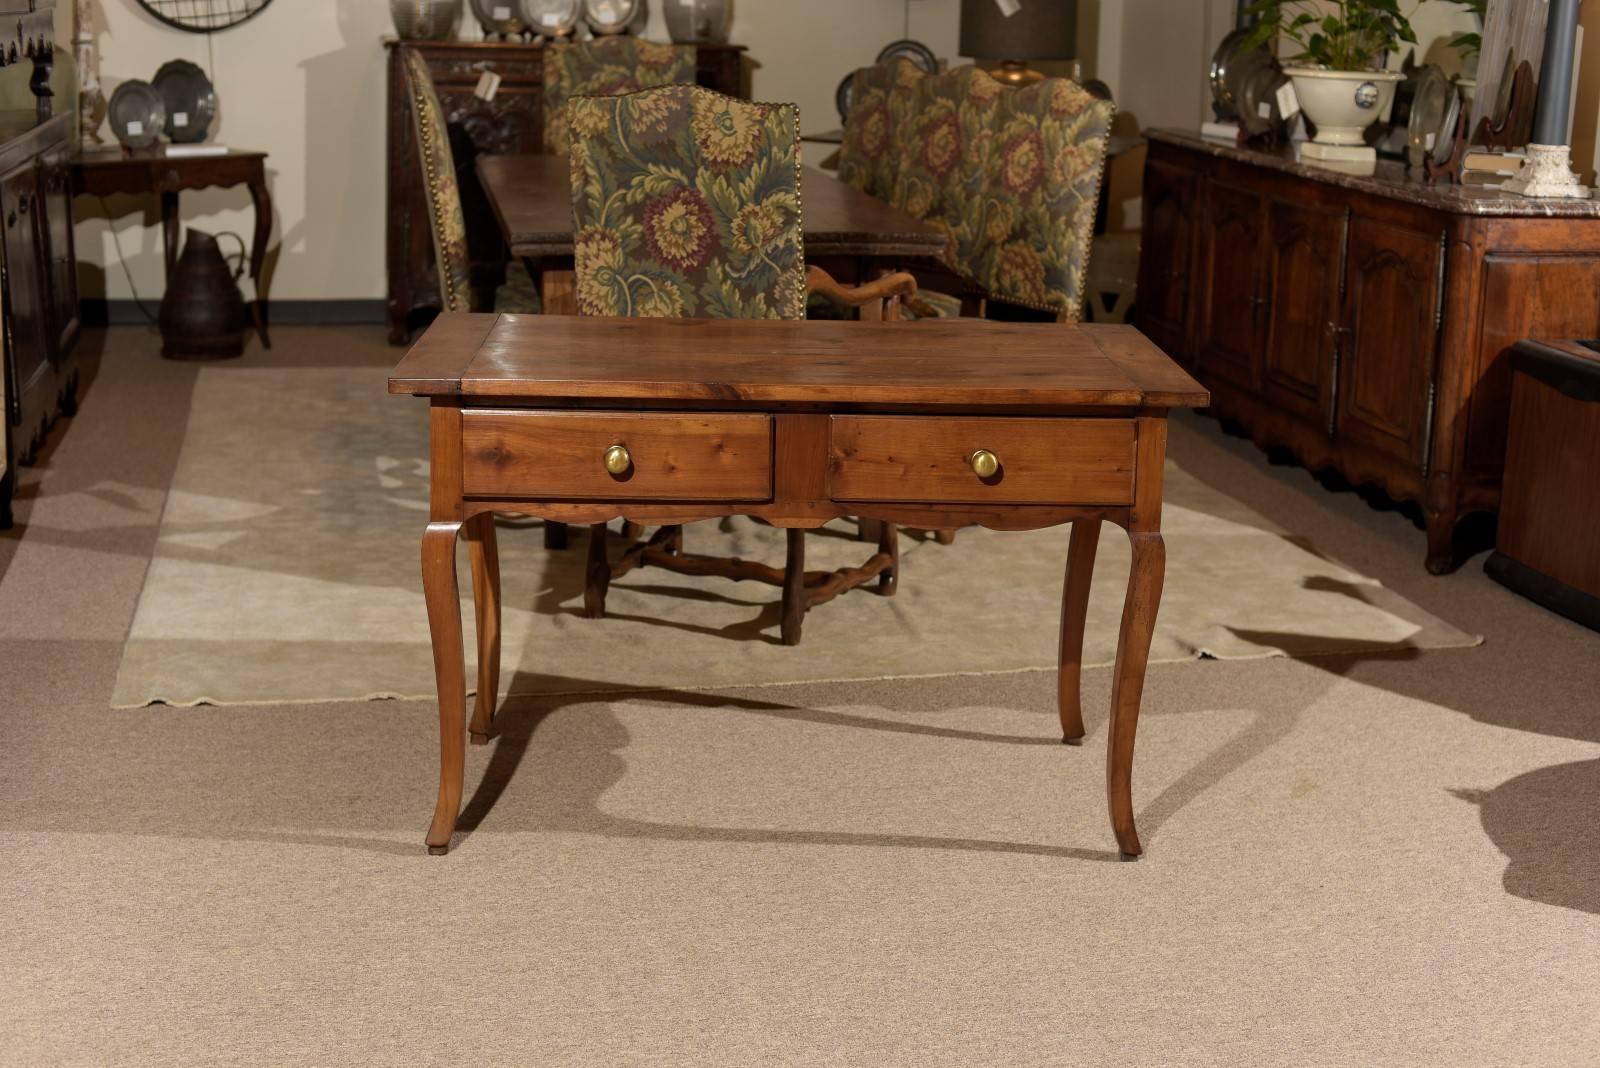 19th Century Cherry Louis XV Style Table with Two Drawers, circa 1820 For Sale 3